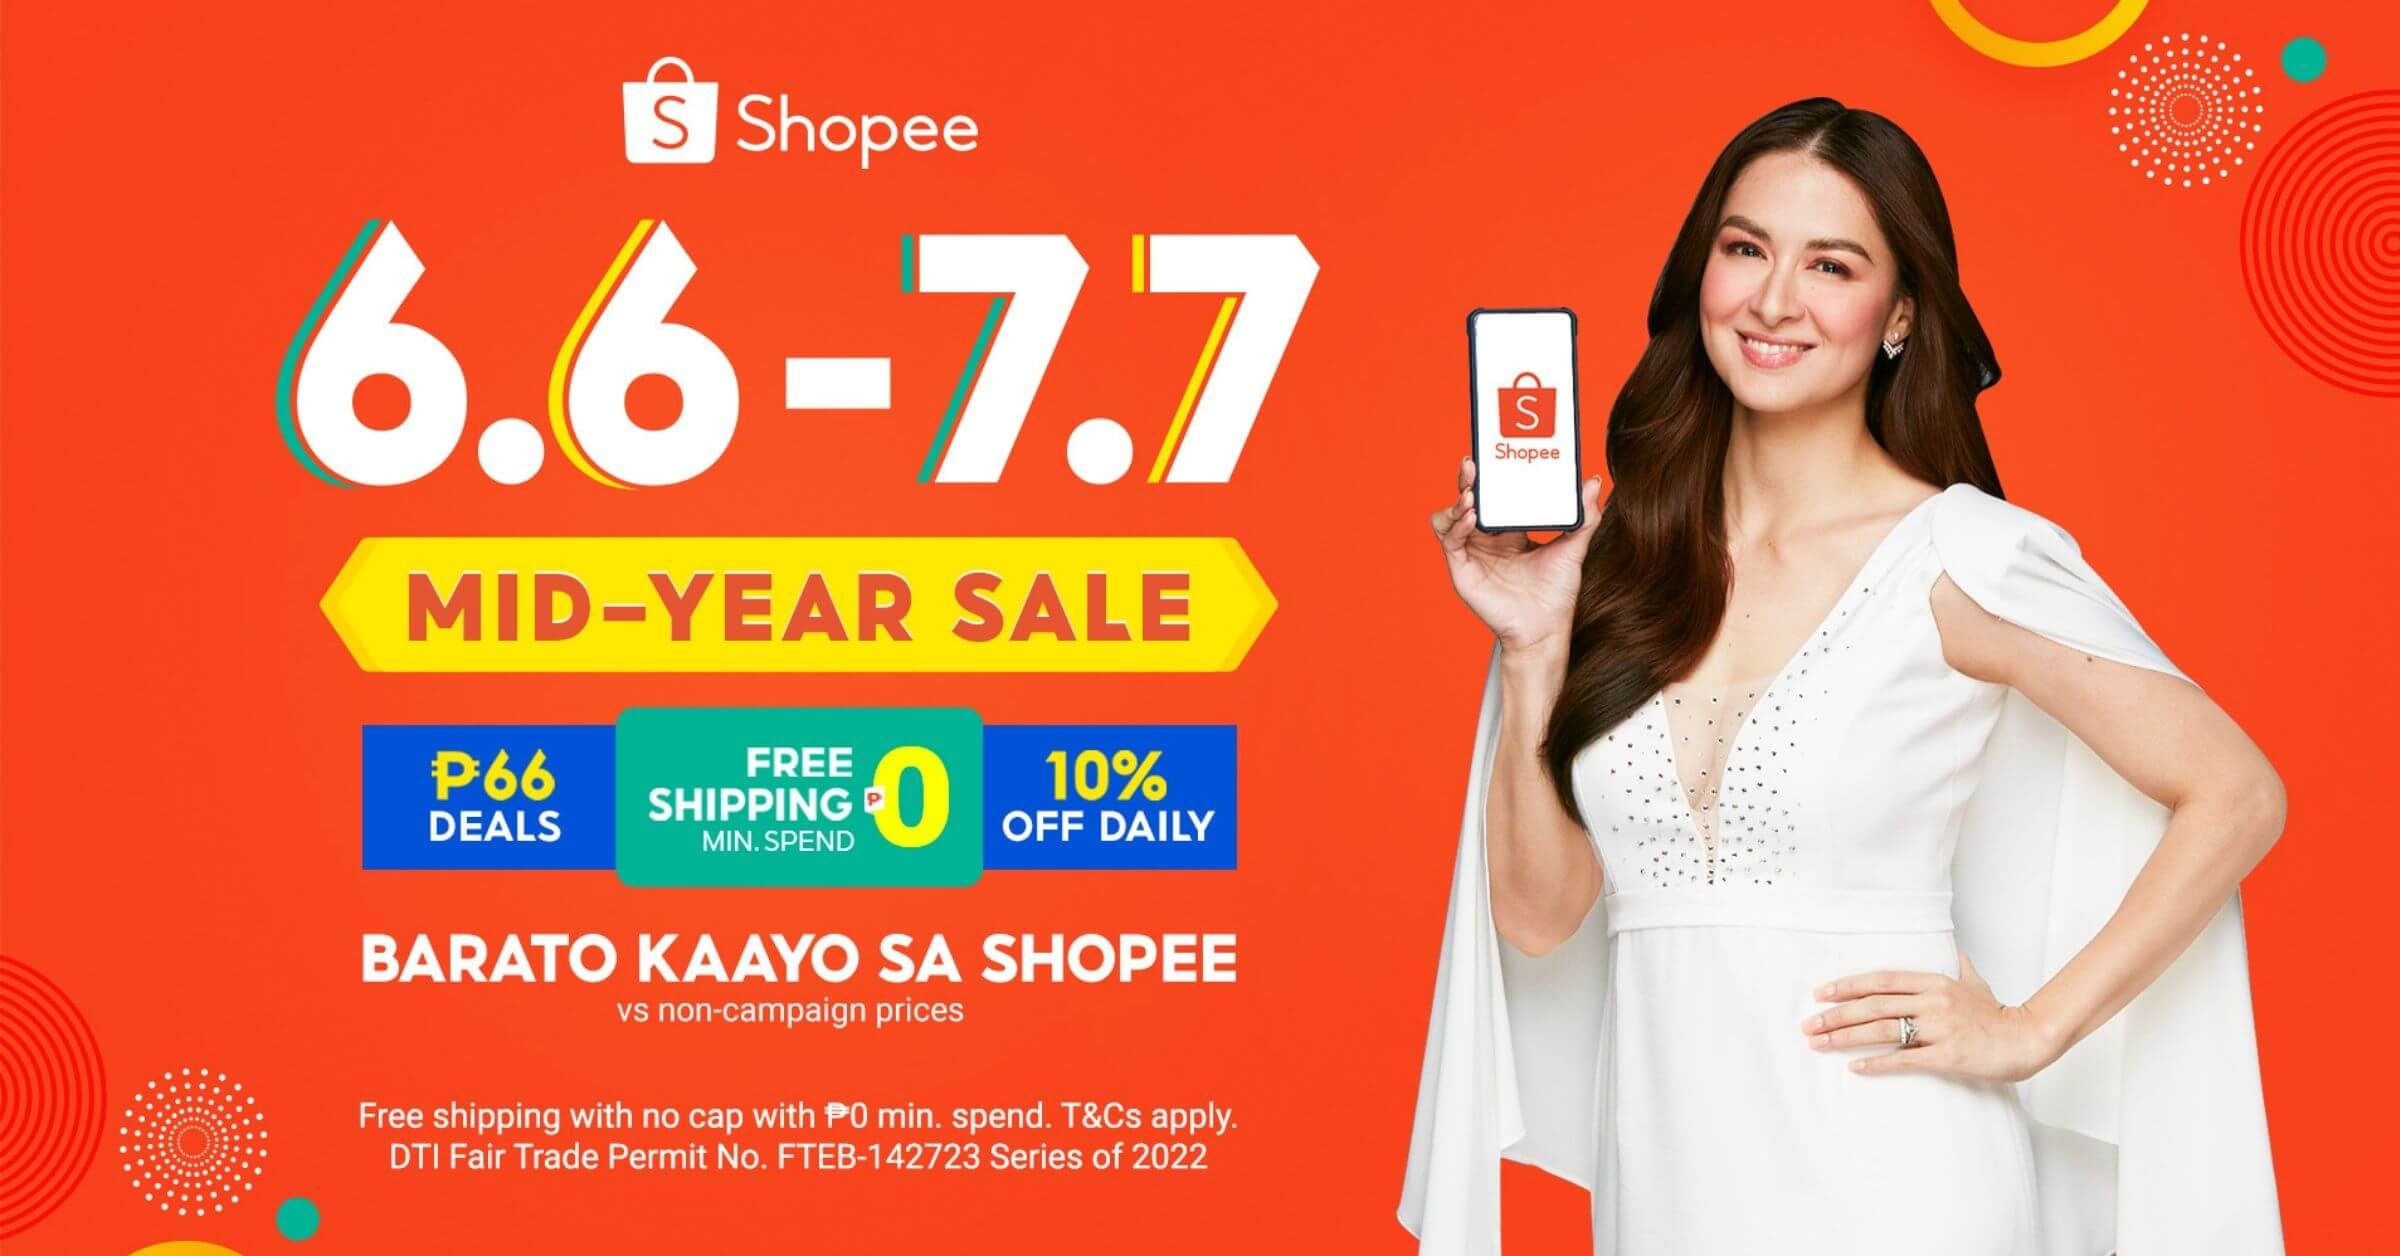 Shopee offers exclusive deals for shoppers in the Visayas in 6.6-7.7 Mid-Year Sale